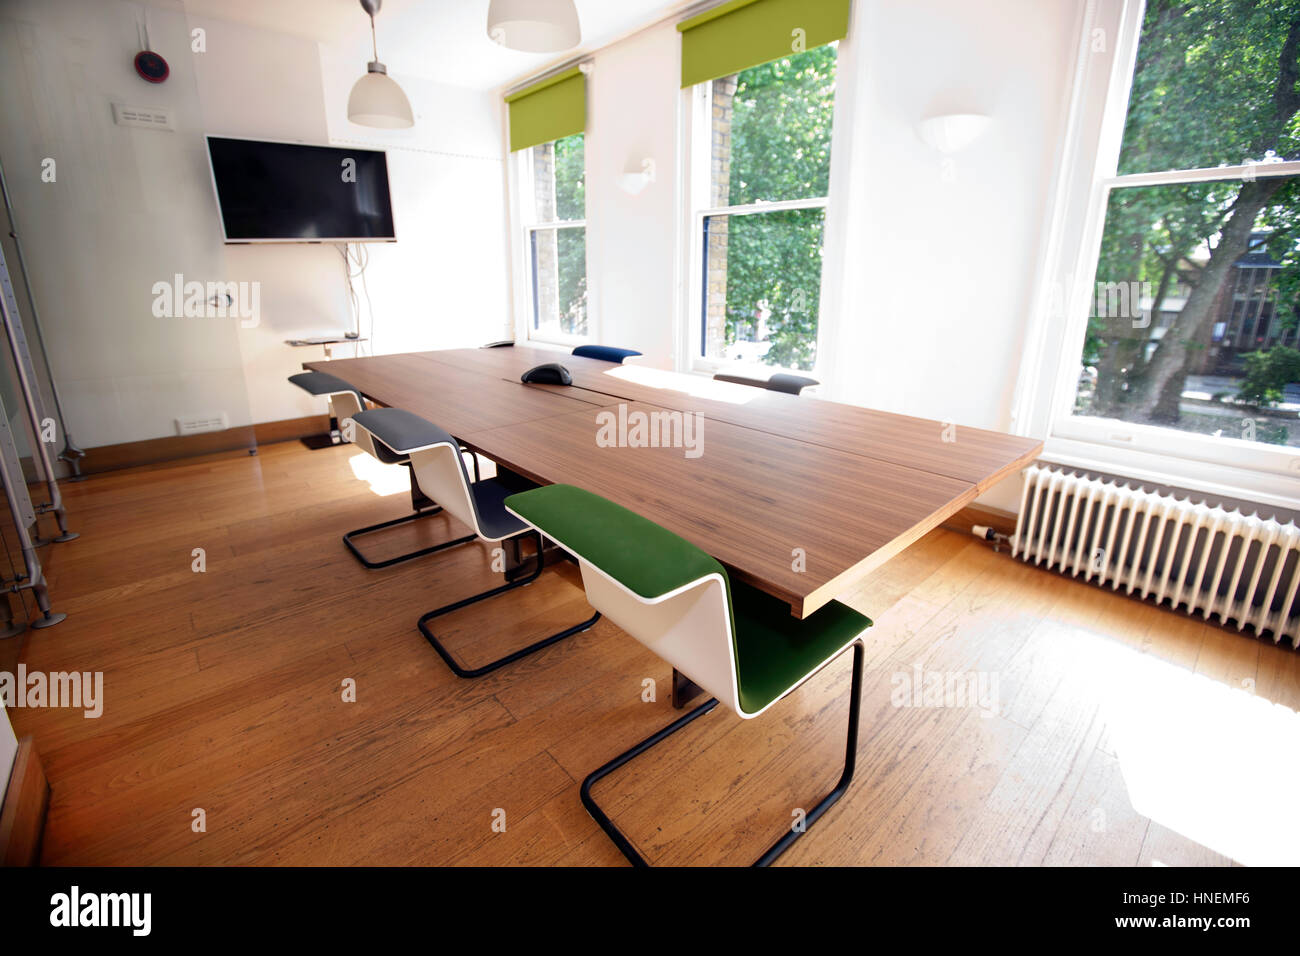 Empty conference room with television Stock Photo